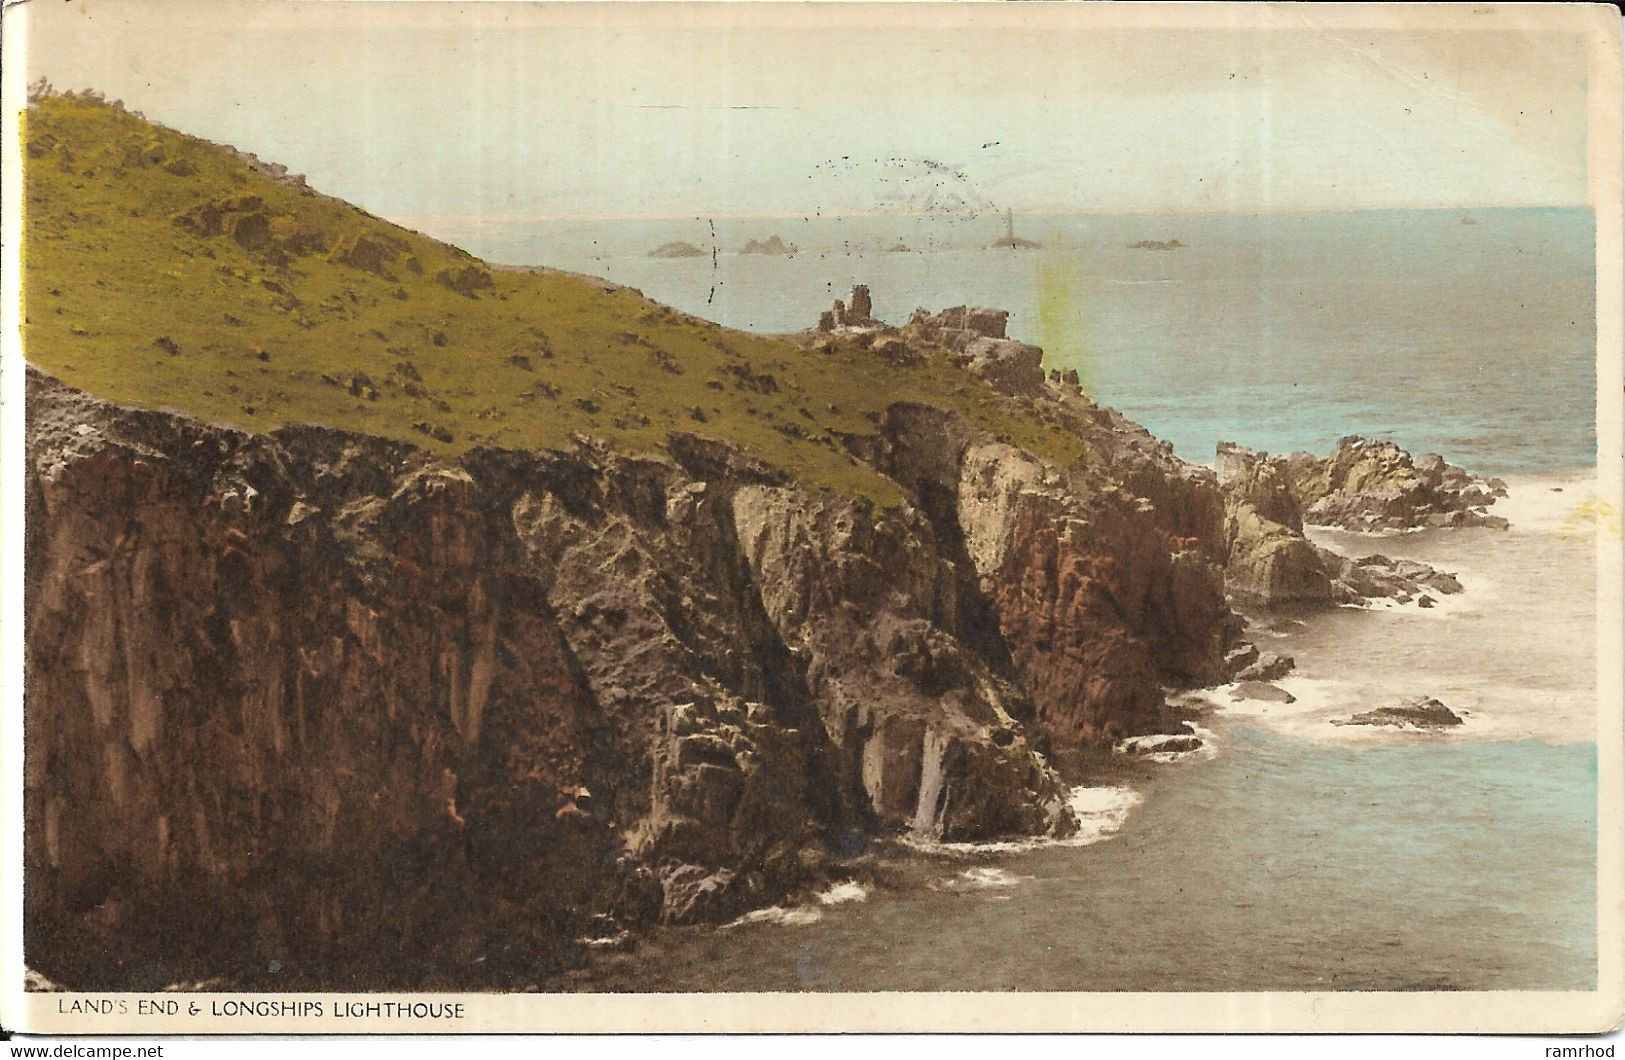 LAND'S END, Longships Lighthouse (Publisher - Unknown) Date - July, 1949, Used - Land's End